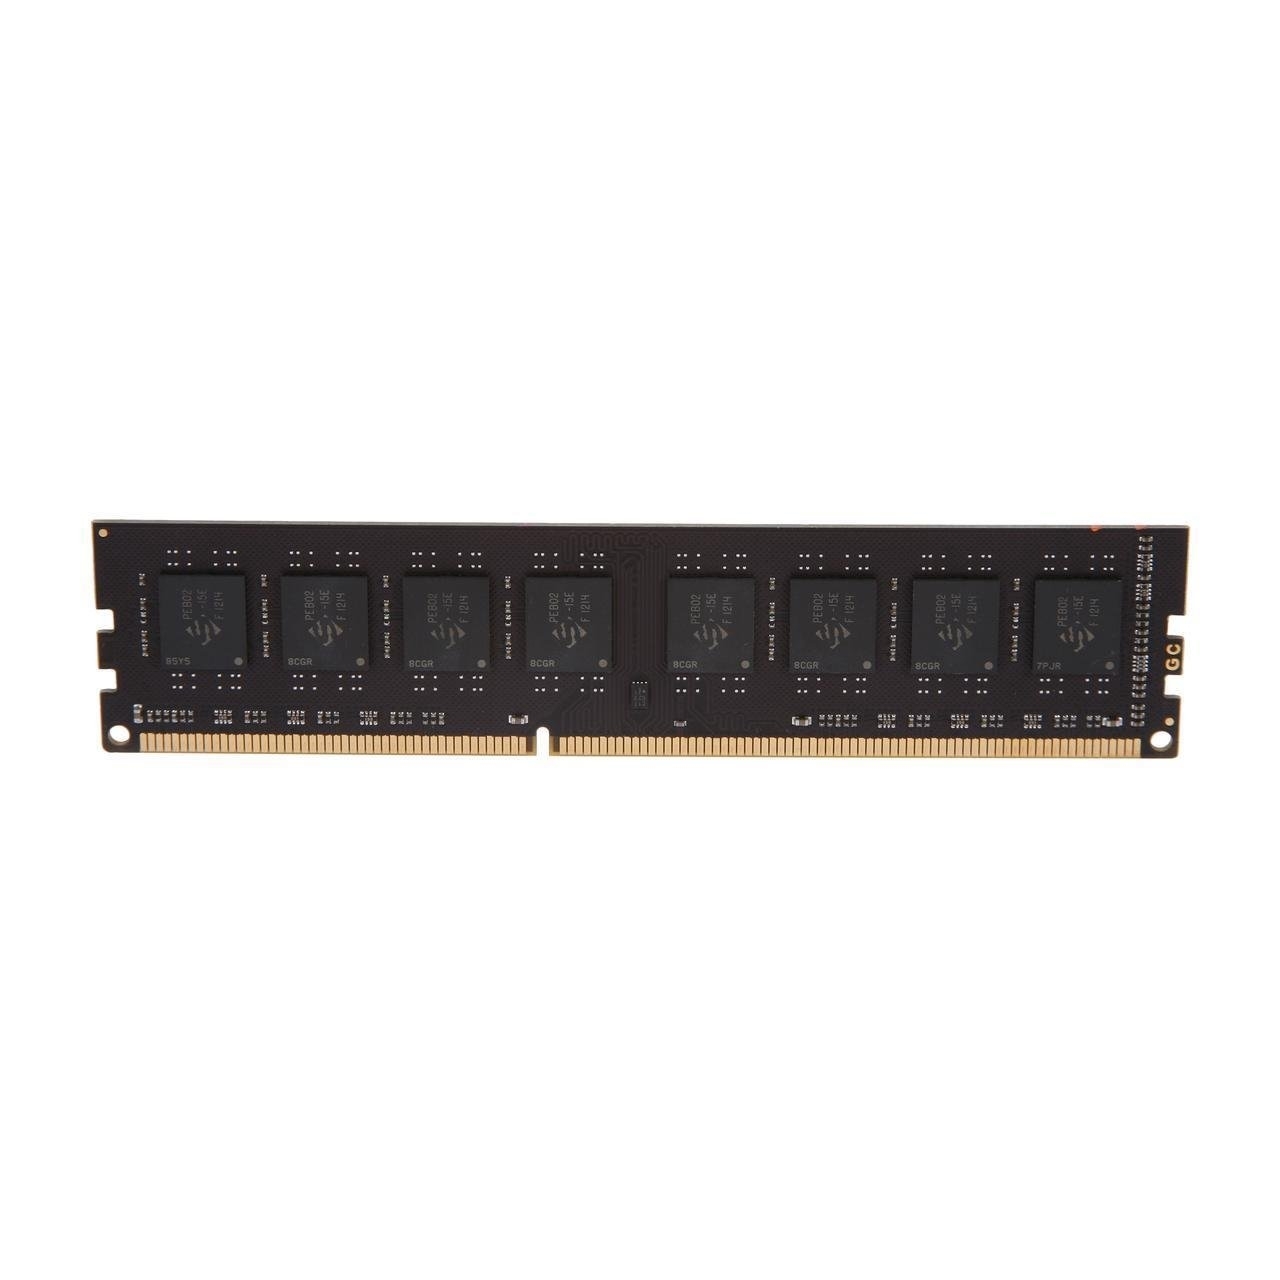 GSKILL 8GB DDR3 1333MHZ CL9 PC RAM VALUE F3-10600CL9S-8GBNT